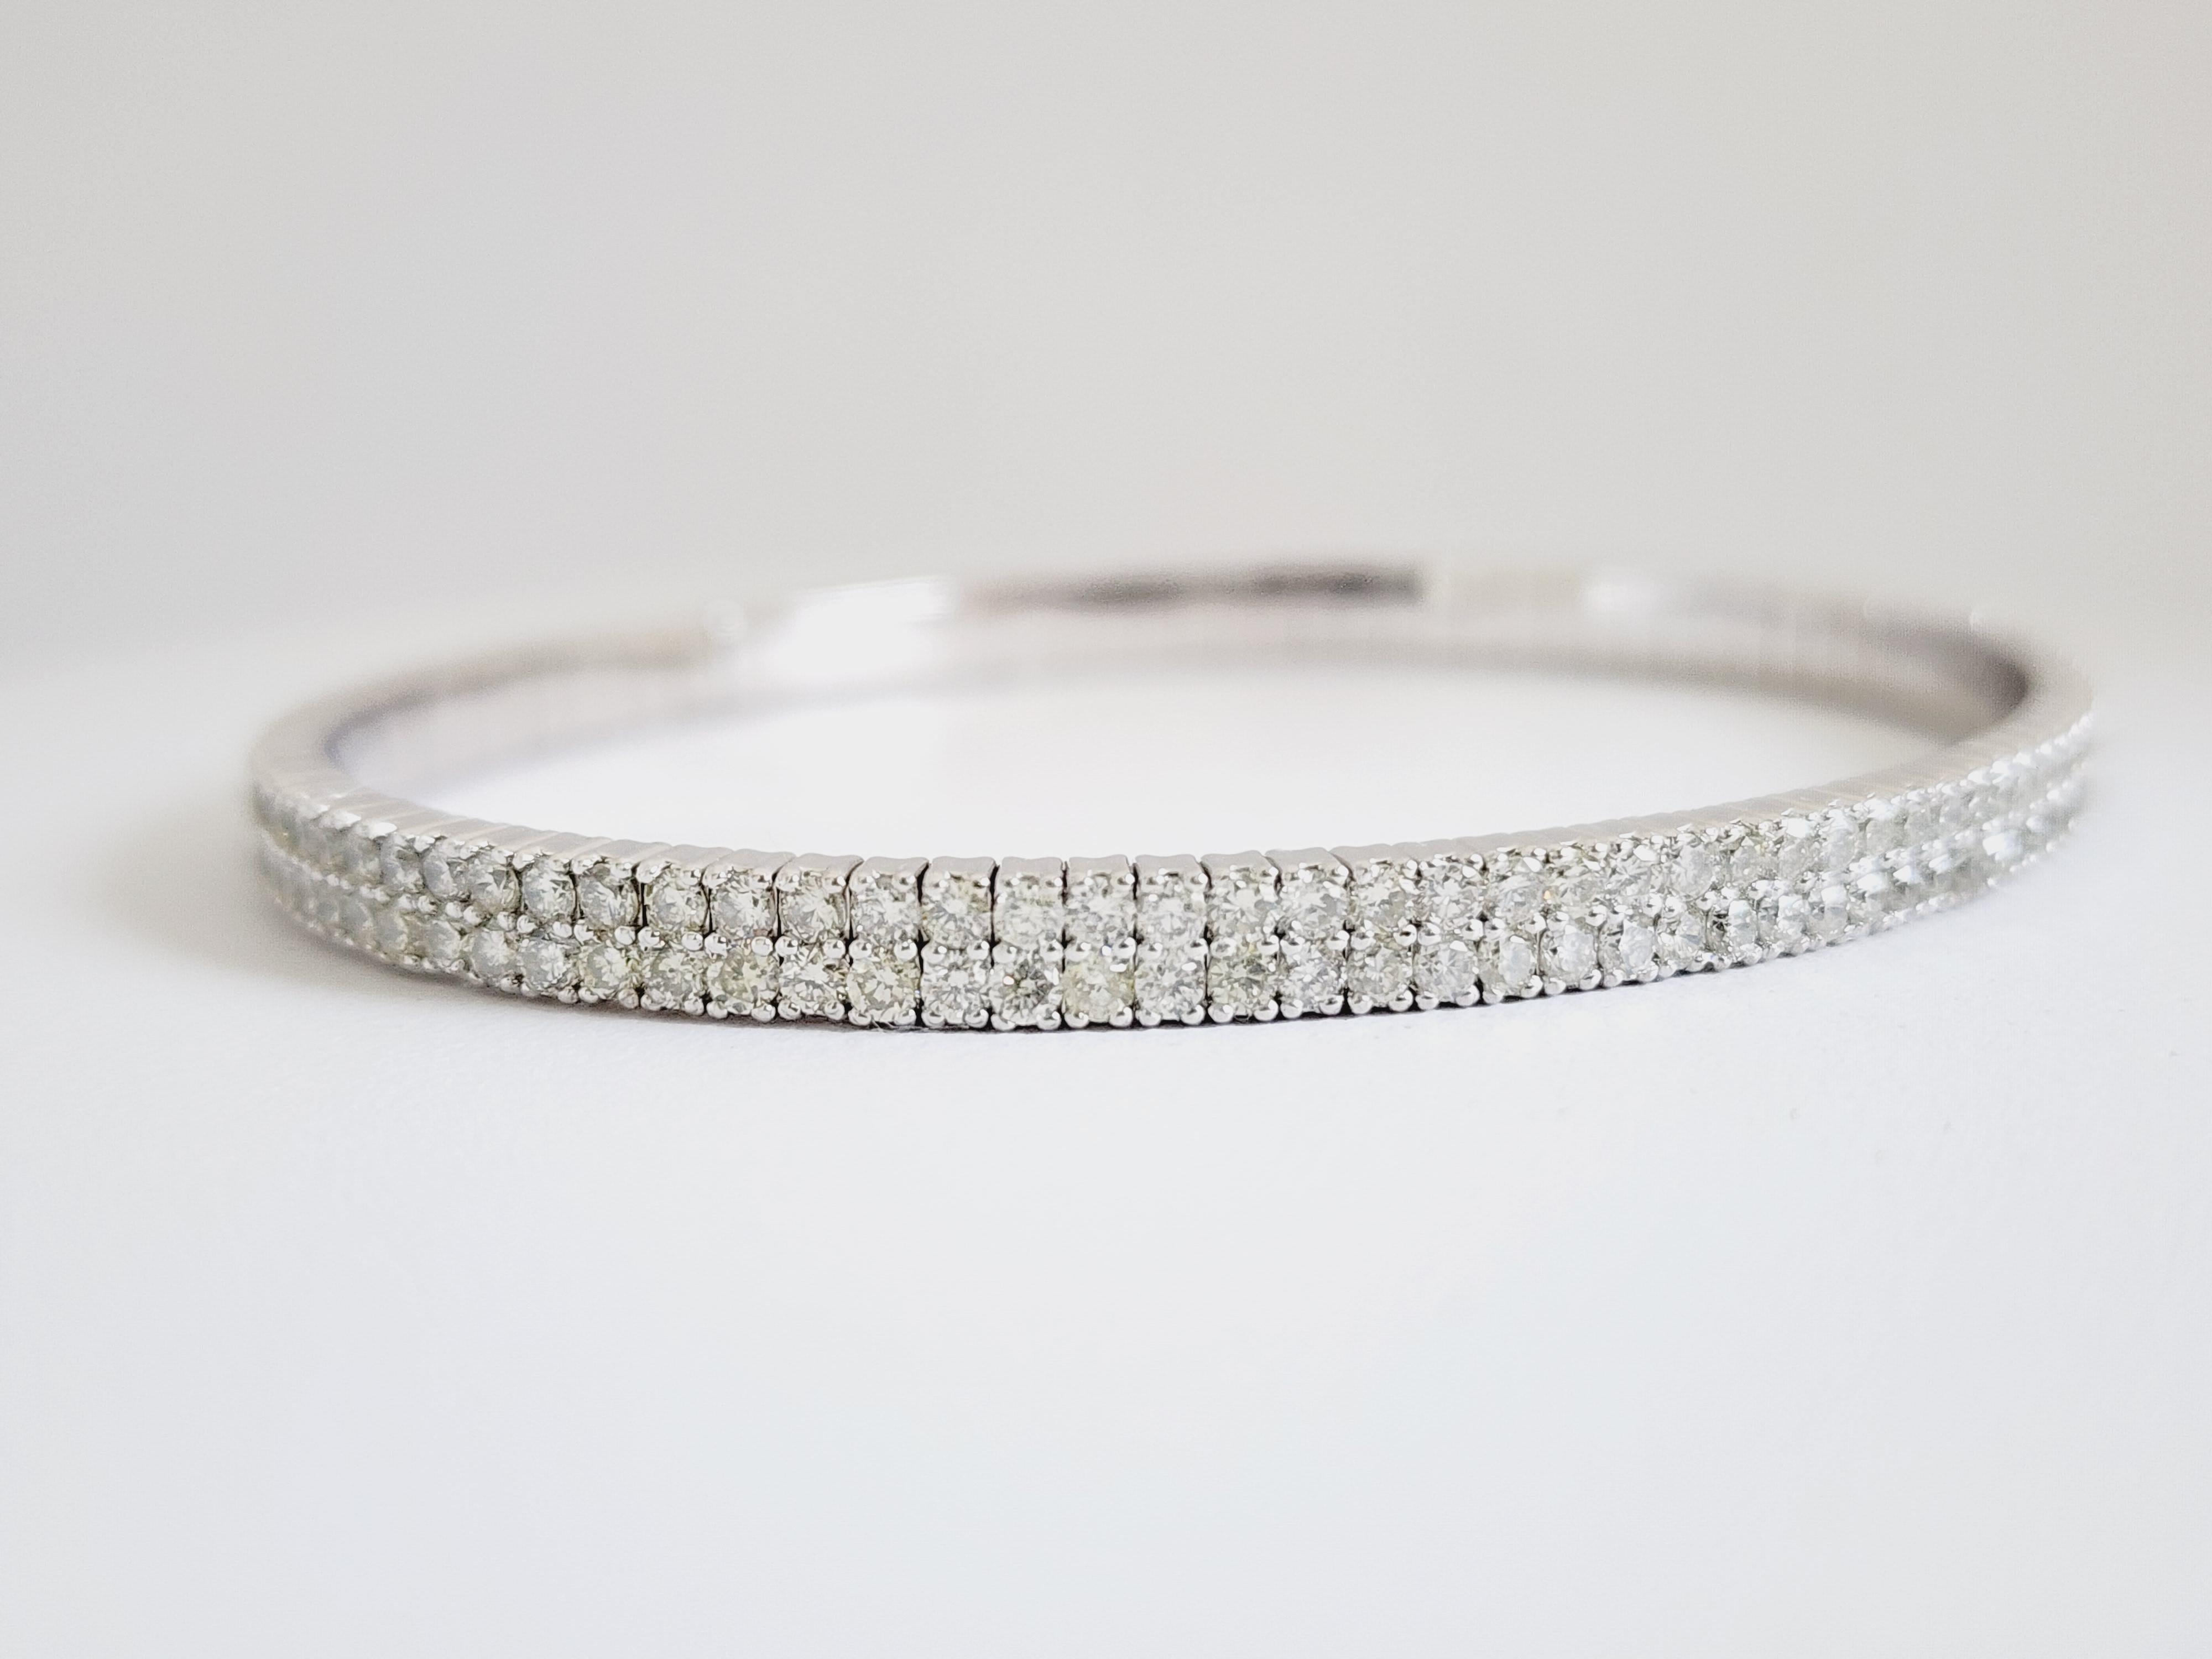 Natural Diamonds 4.82 ctw Flexible double row bangle white gold 14k 7 Inch. Color H, Clarity SI. 4 mm.

*Free shipping within the U.S.*